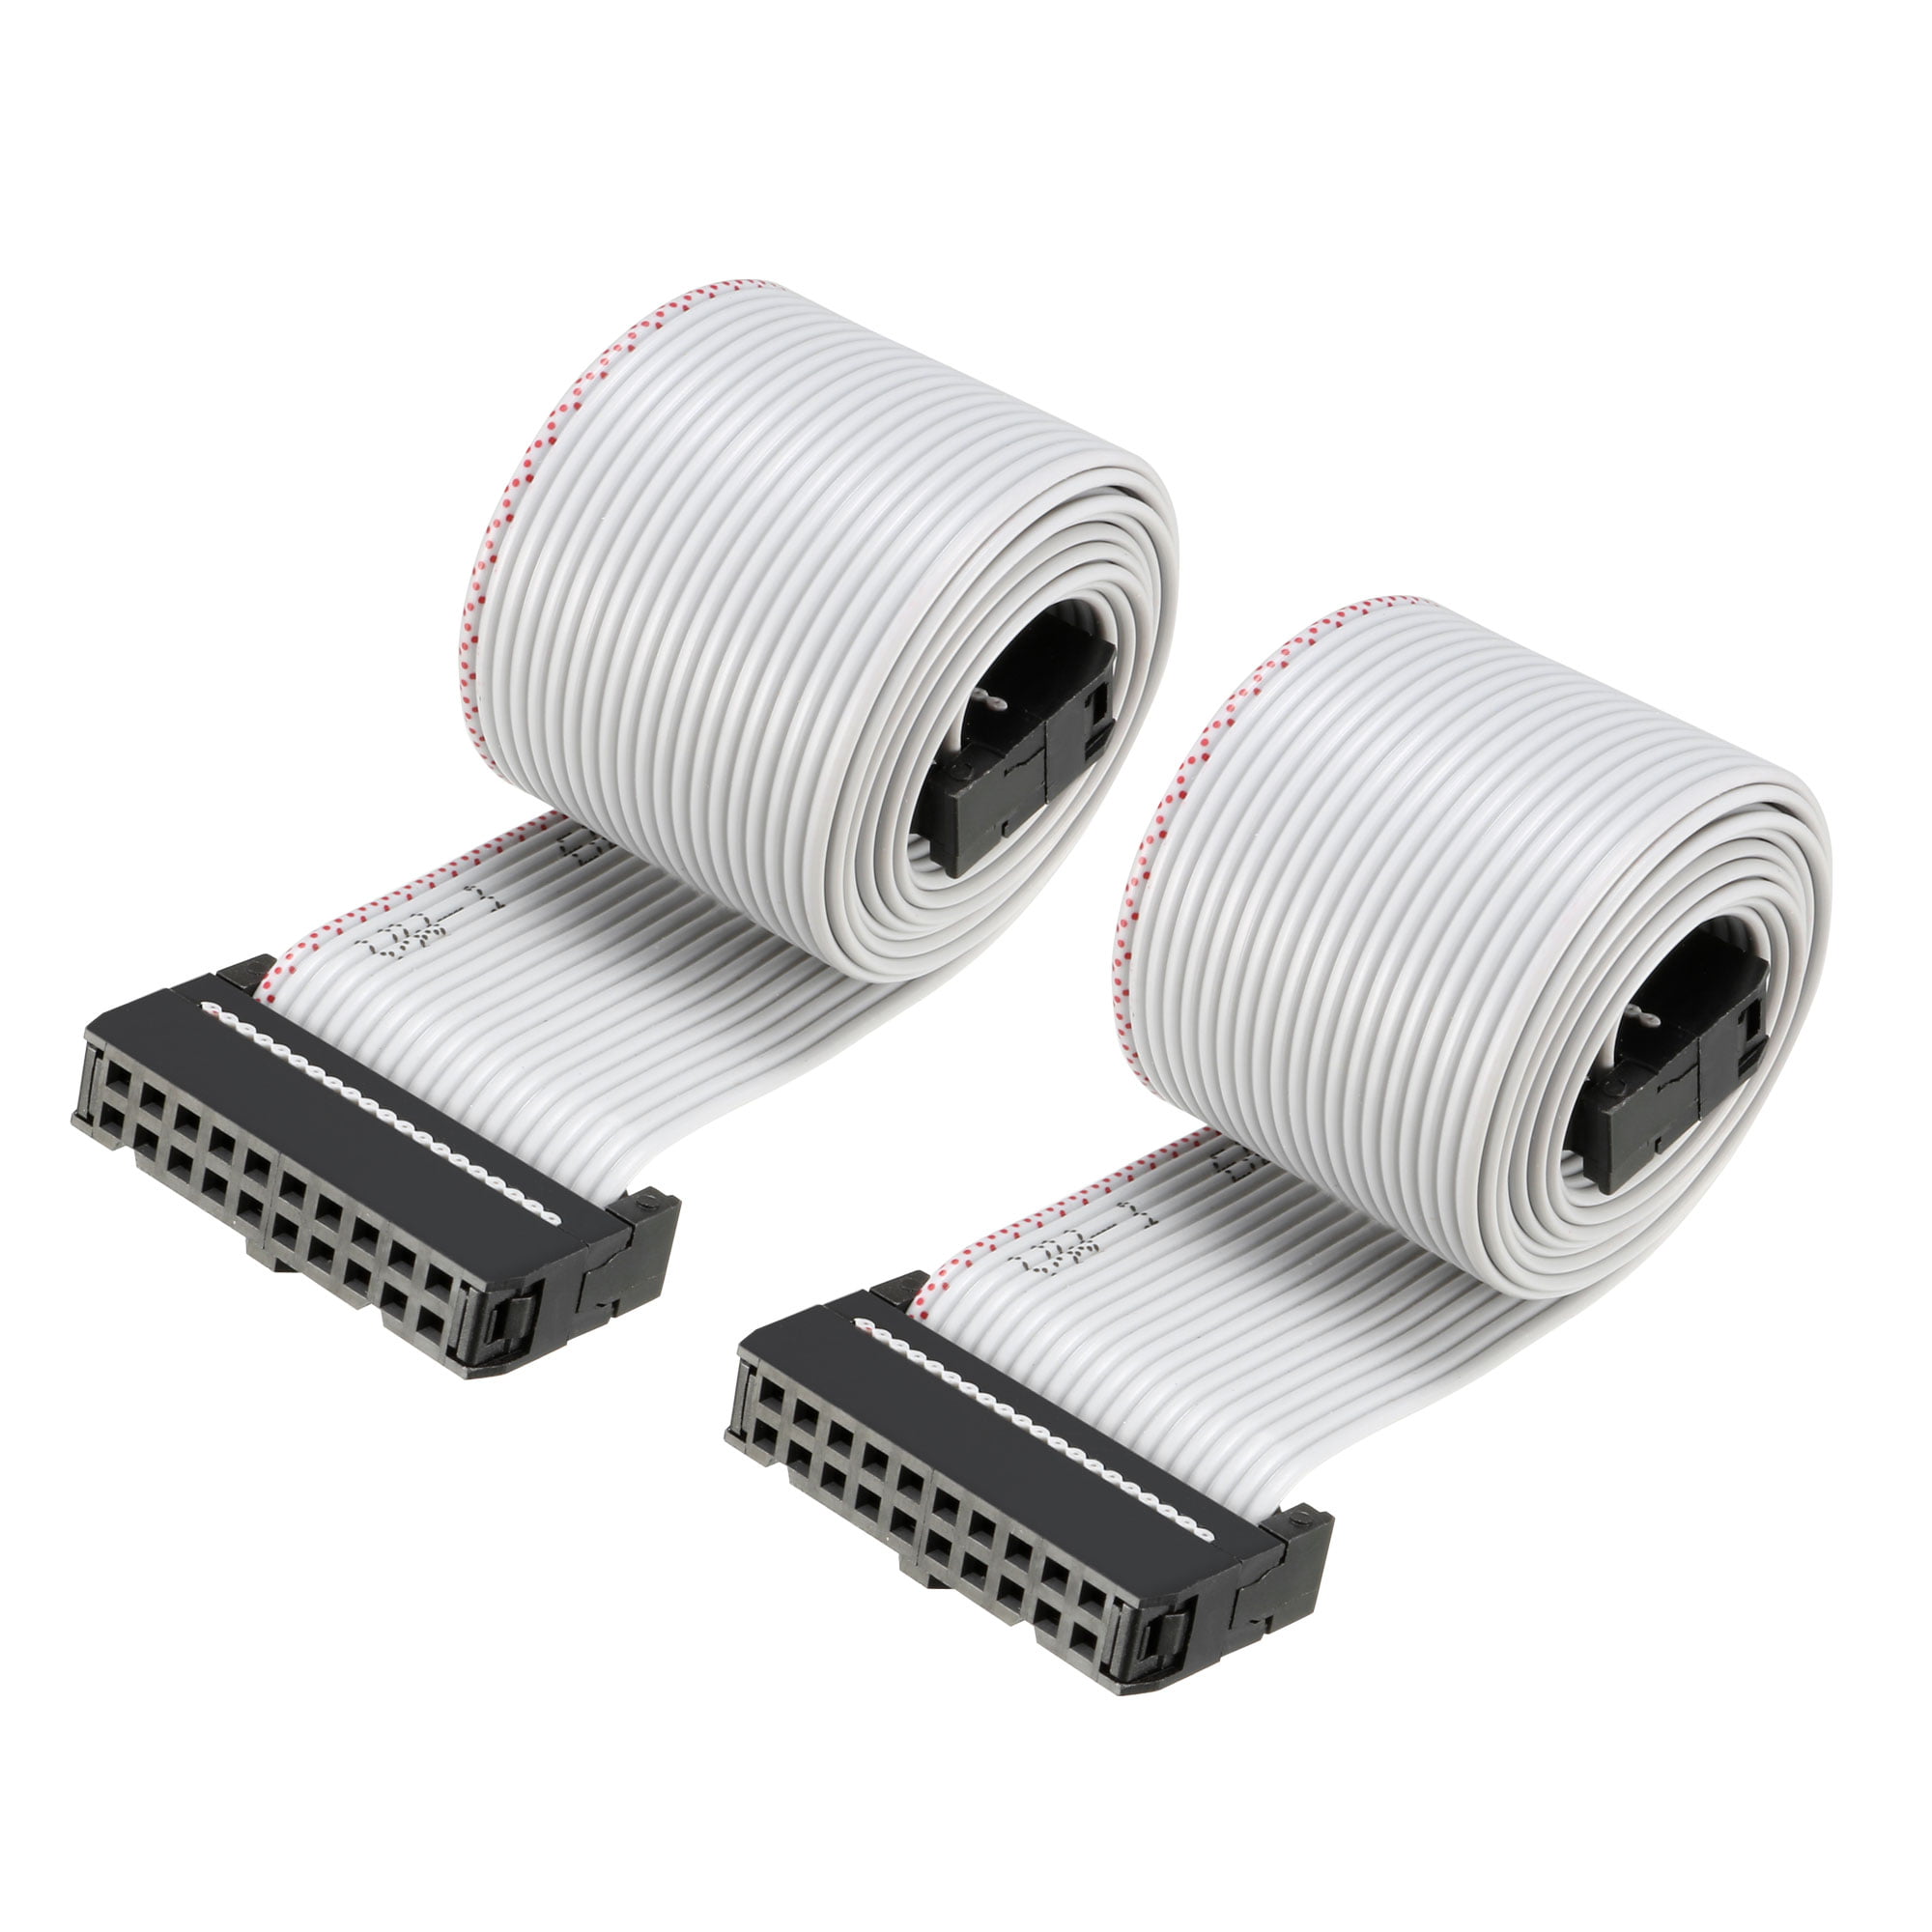 1Pcs 1.27mm Pitch 20 Pin 20 Wire Extension IDC Flat Ribbon Cable Length 10CM 